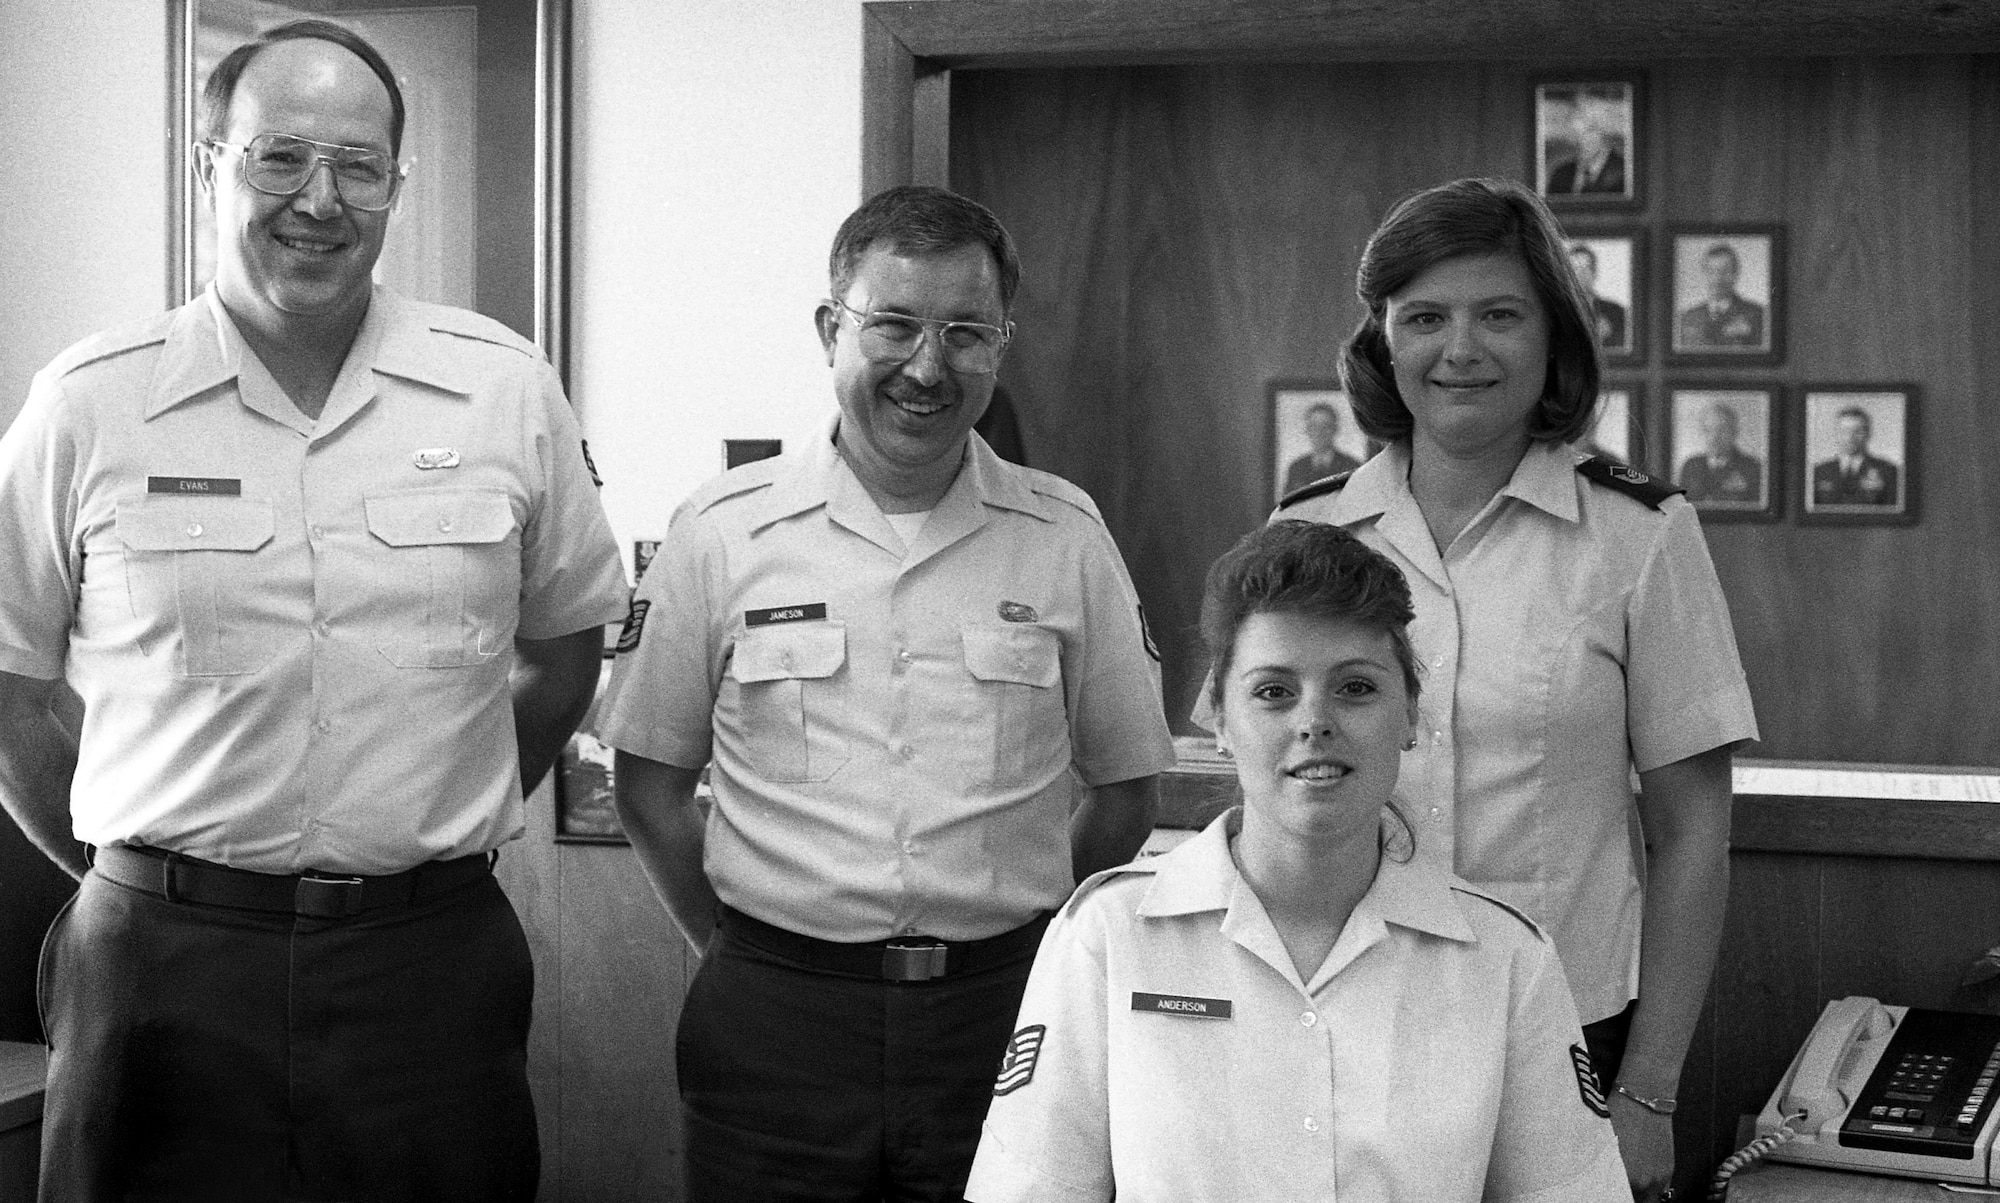 Mike Evans, Jack Jameson and Charlotte Brown gather for a photo with Tech. Sgt. Jean (Allen) Anderson, at the Portland Air National Guard Base, Ore., in 1990. Allen retired after more than 32 years of service on Dec. 22, 2015. (Air Nation Guard photo courtesy of the 142nd Fighter Wing History Office)